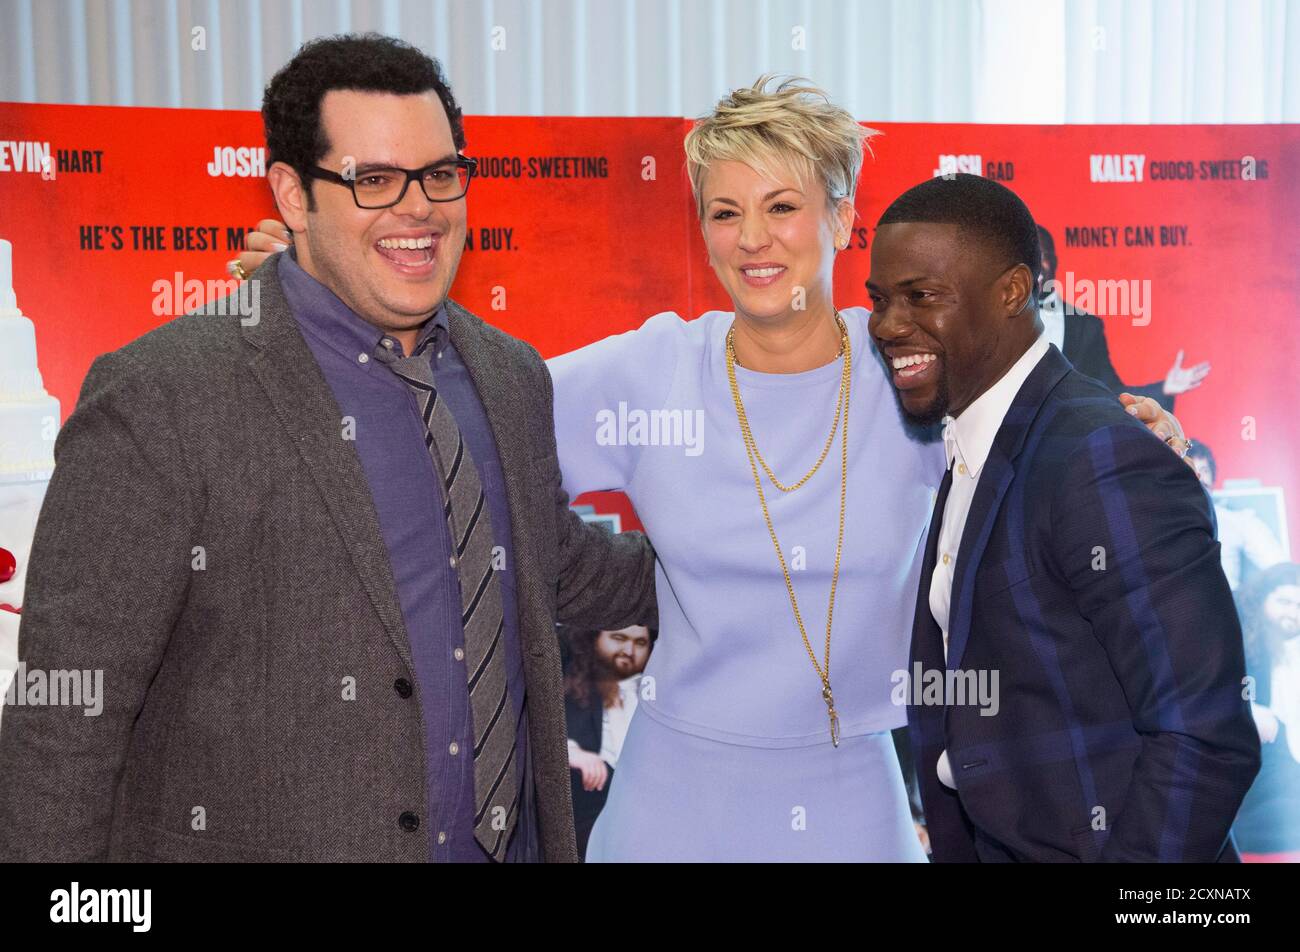 Cast members Kaley Cuoco-Sweeting, Kevin Hart (R) and Josh Gad pose during a  photocall for the "The Wedding Ringer" in West Hollywood, California  January 6, 2015. The movie opens in the U.S.